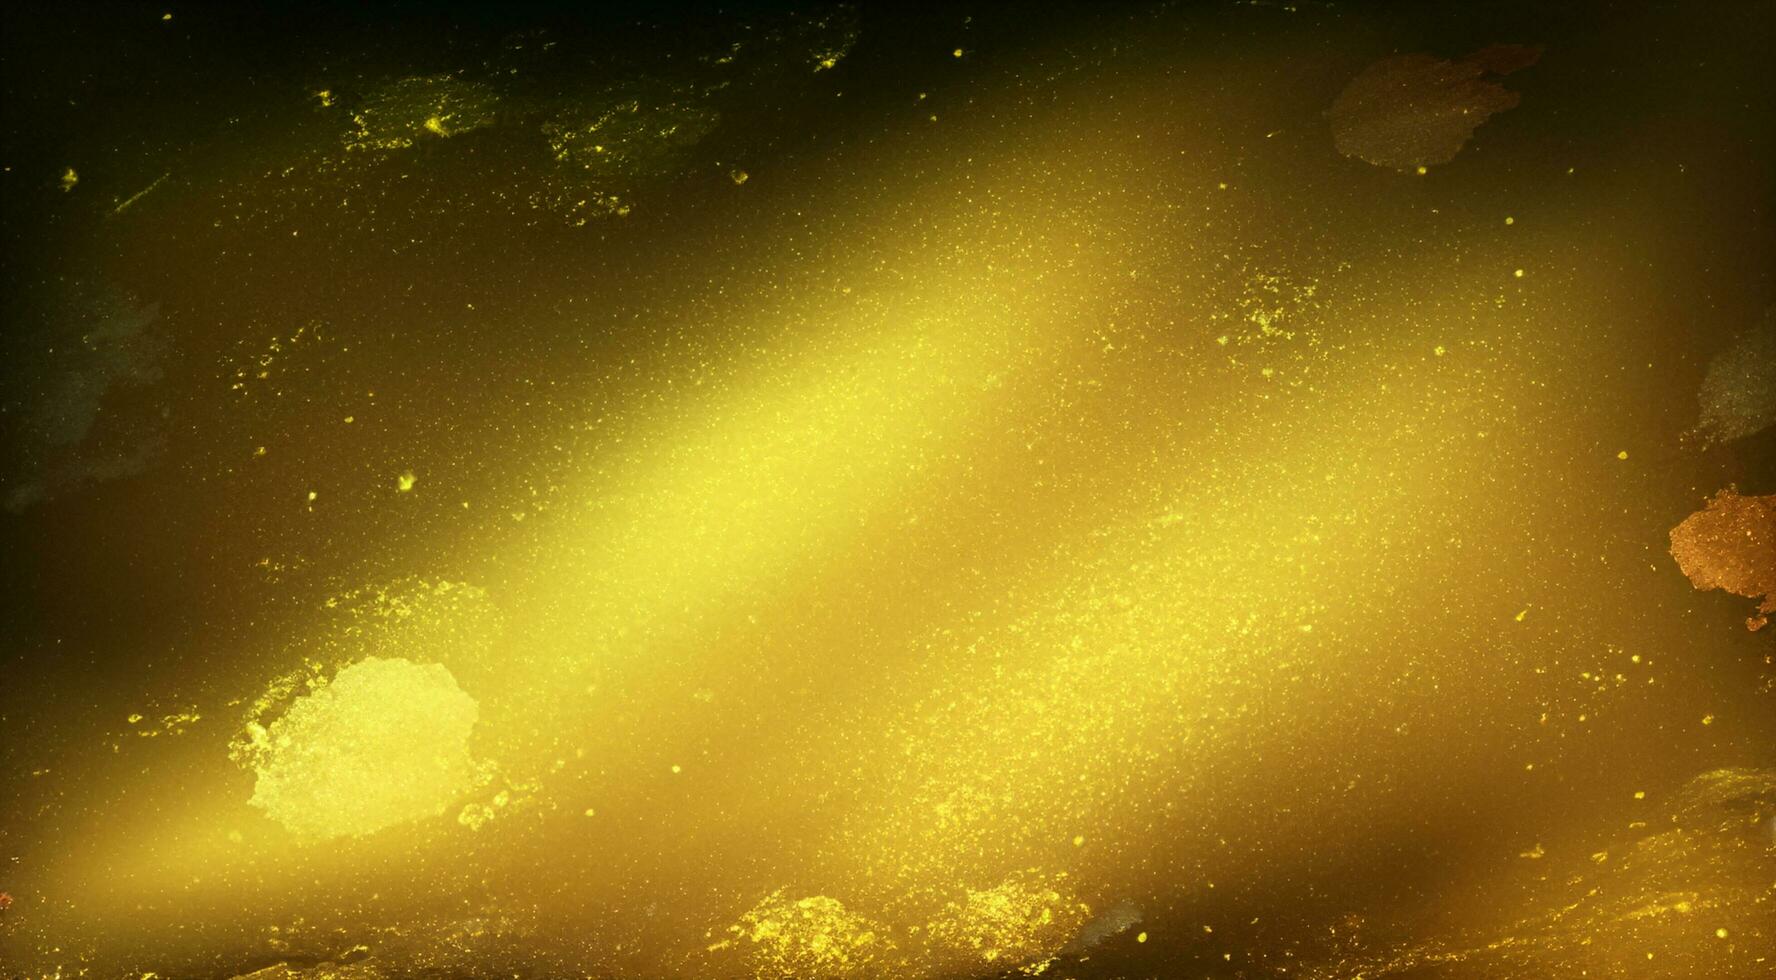 abstract golden background photo